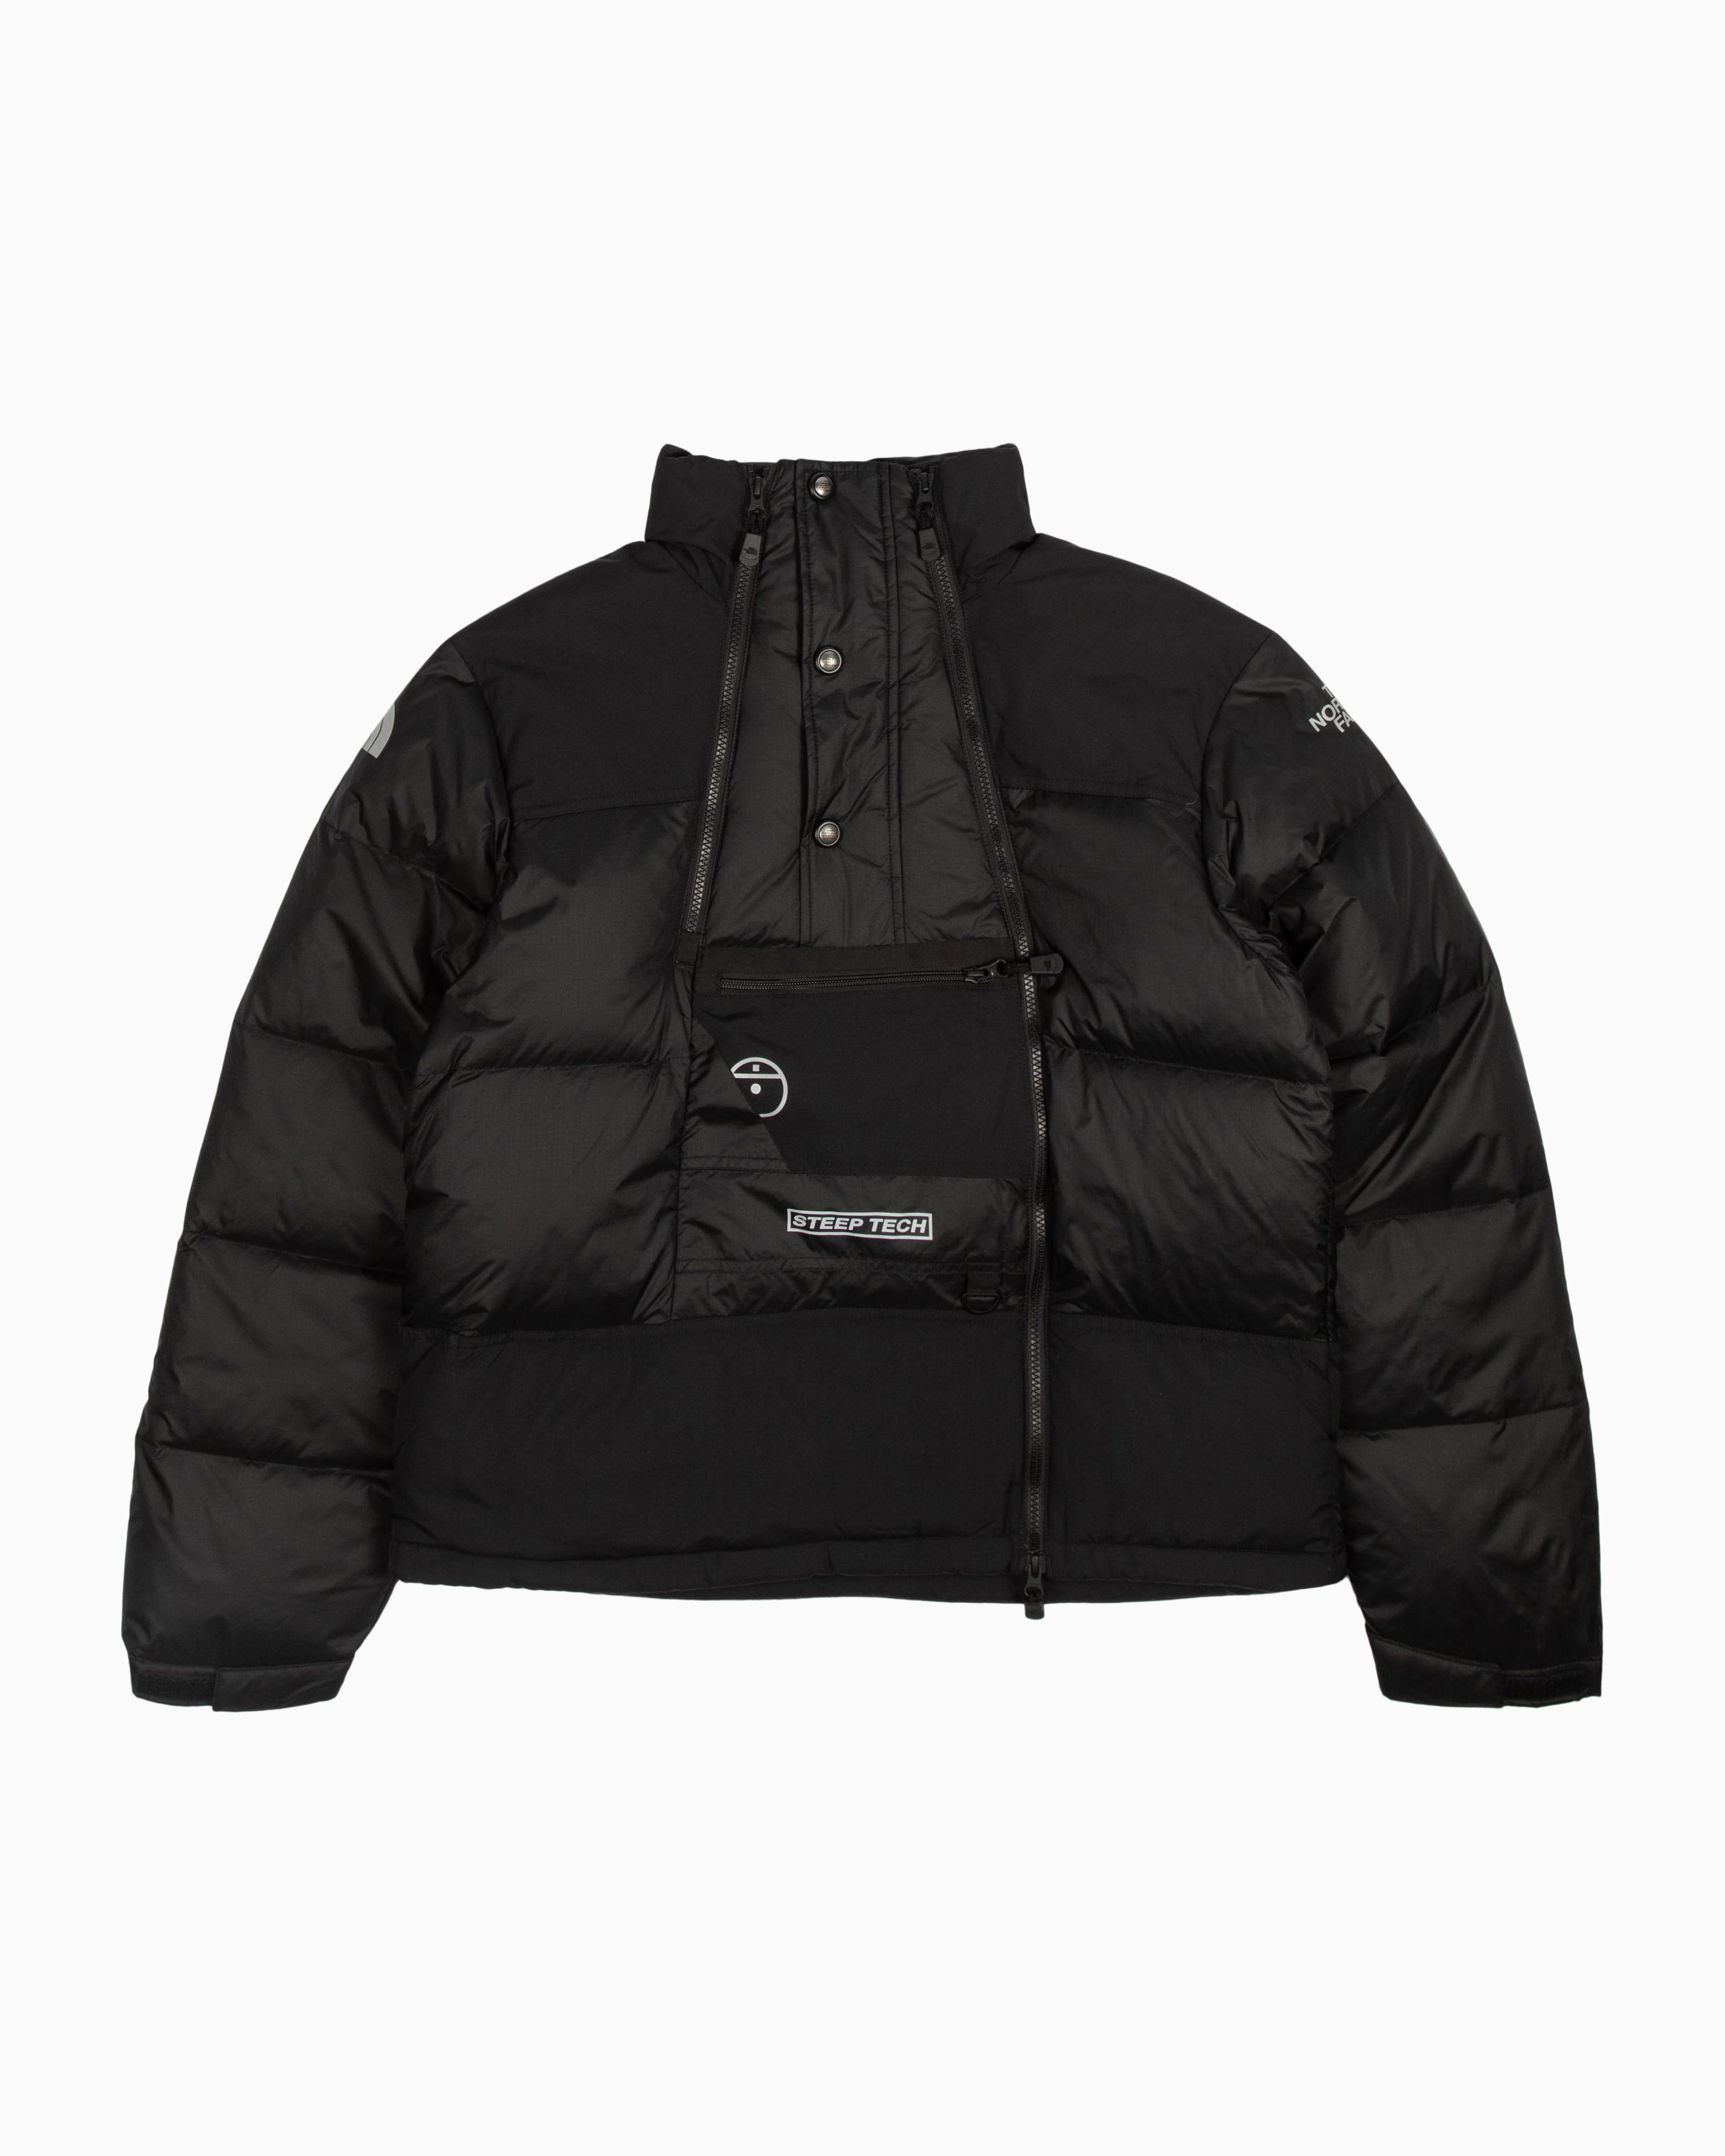 Steep Tech Down Jacket The North Face Outerwear Jackets Black